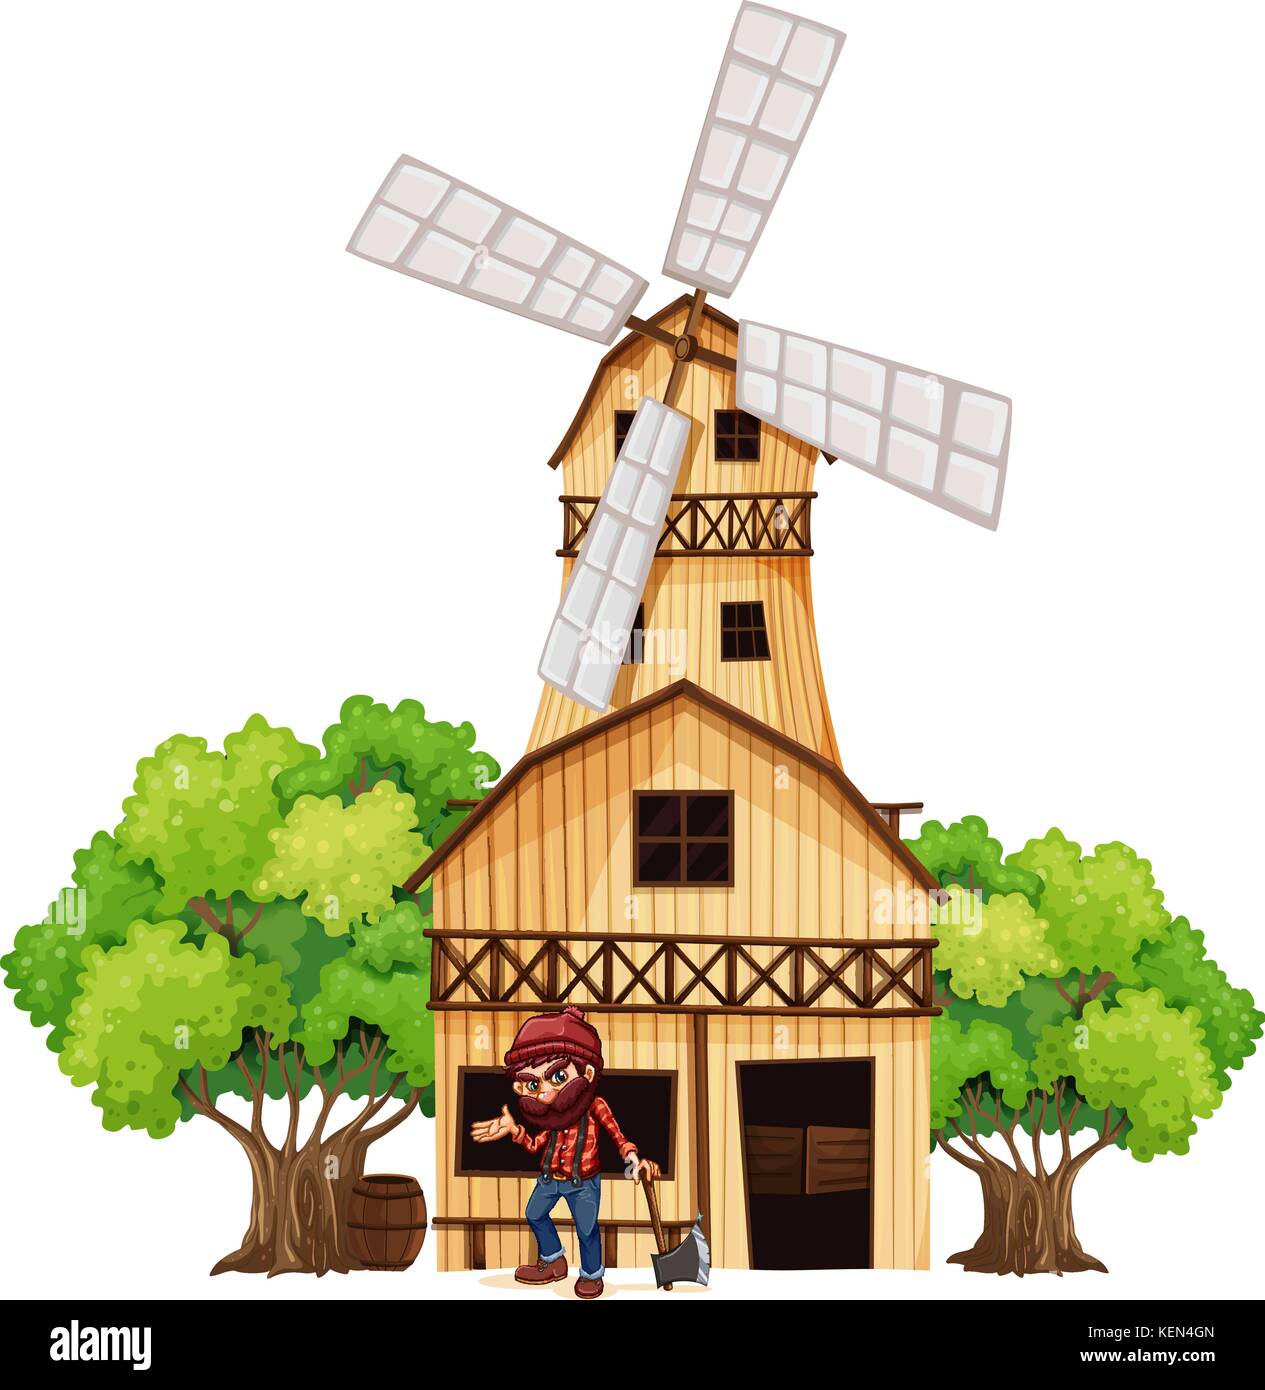 Illustration of a woodman holding an axe beside the wooden building on a white background Stock Vector